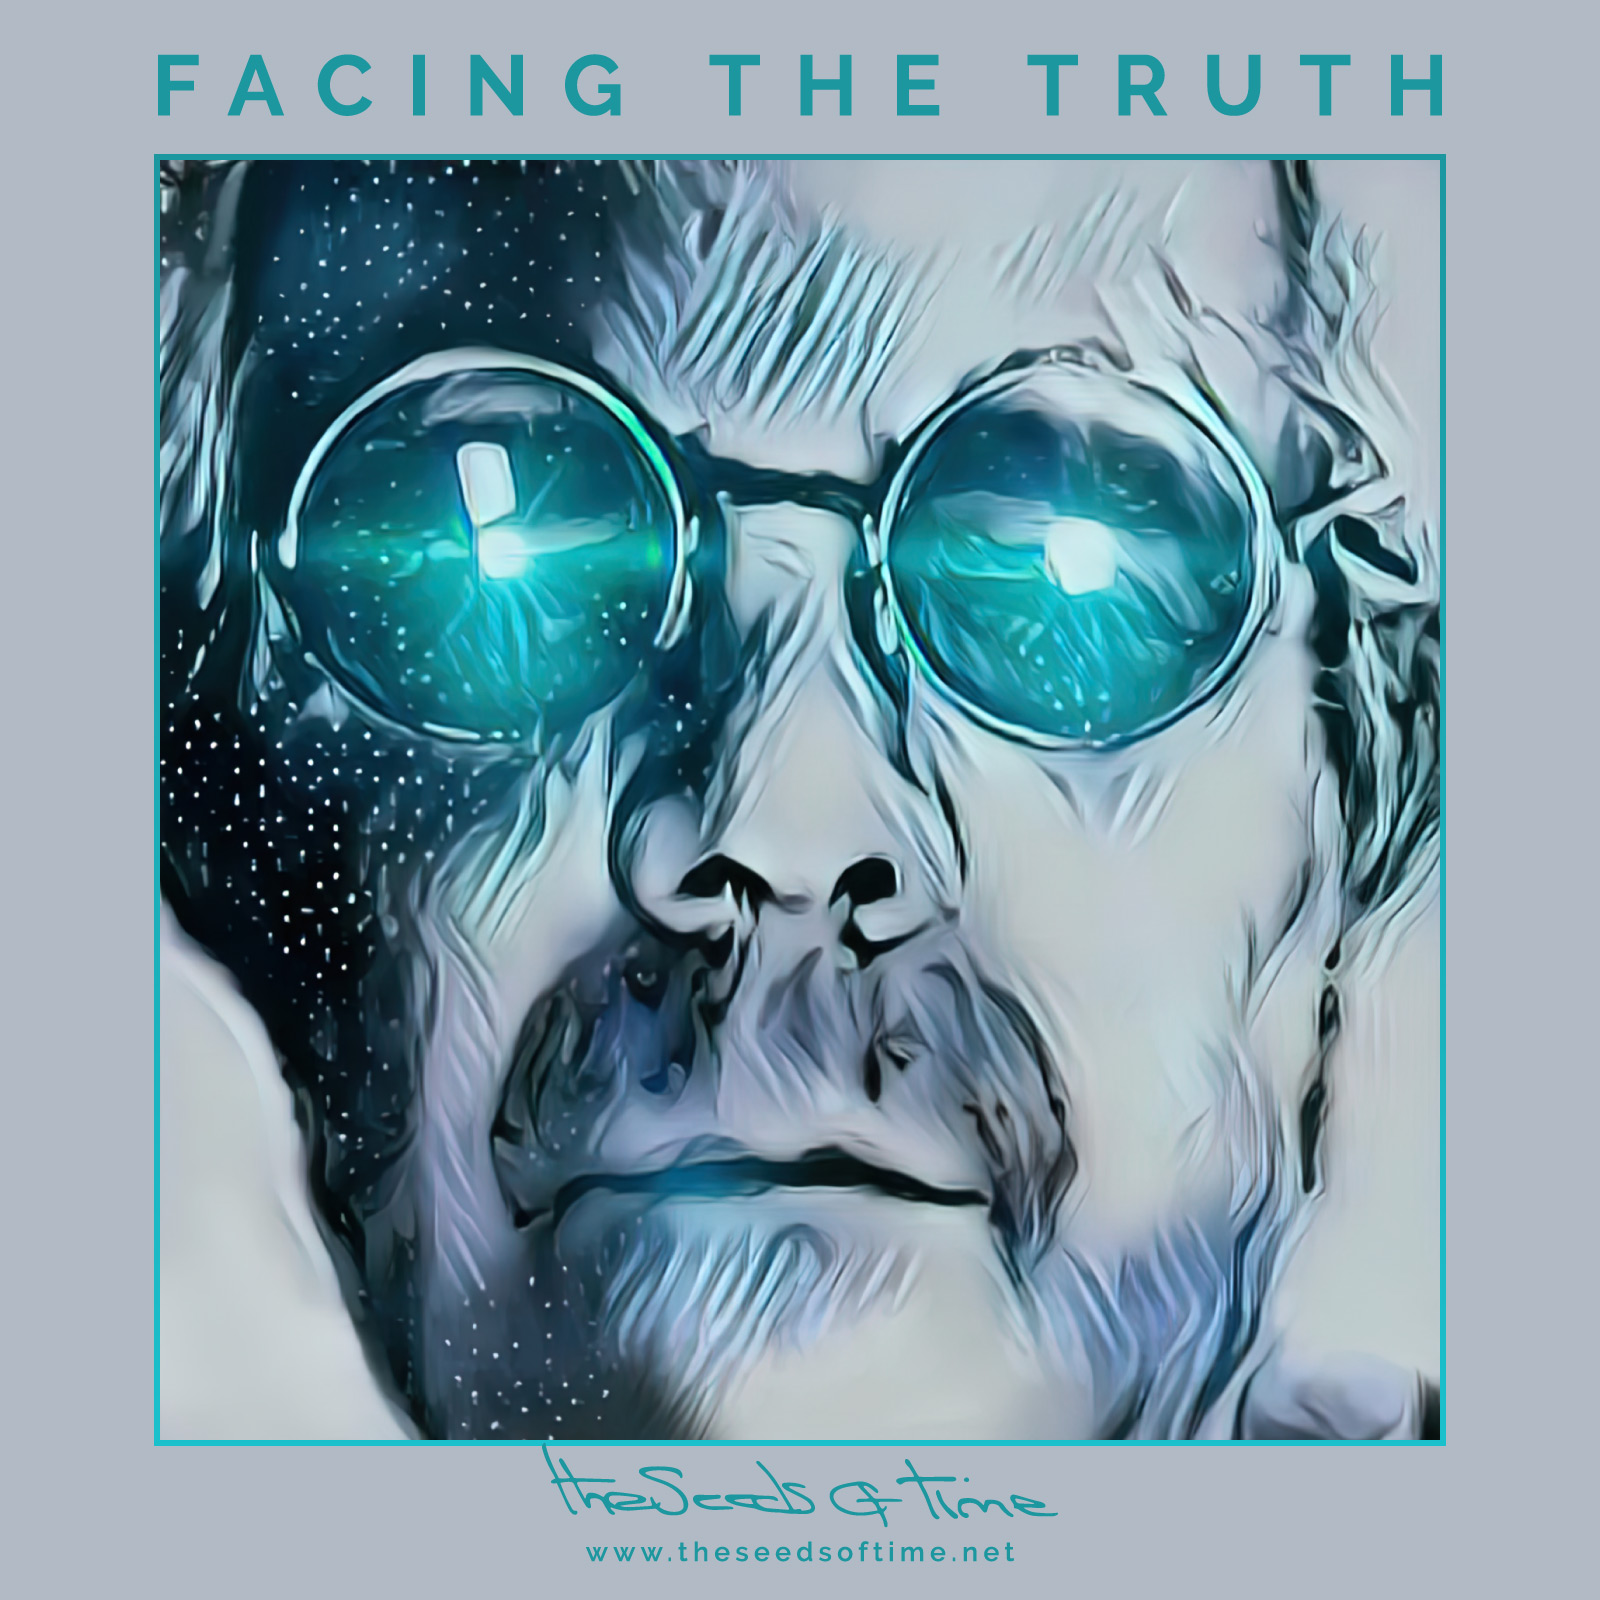 Track image for song titled Facing the Truth by The Seeds of Time showing a face of a man with round glasses and all colours being grey, blue and teal